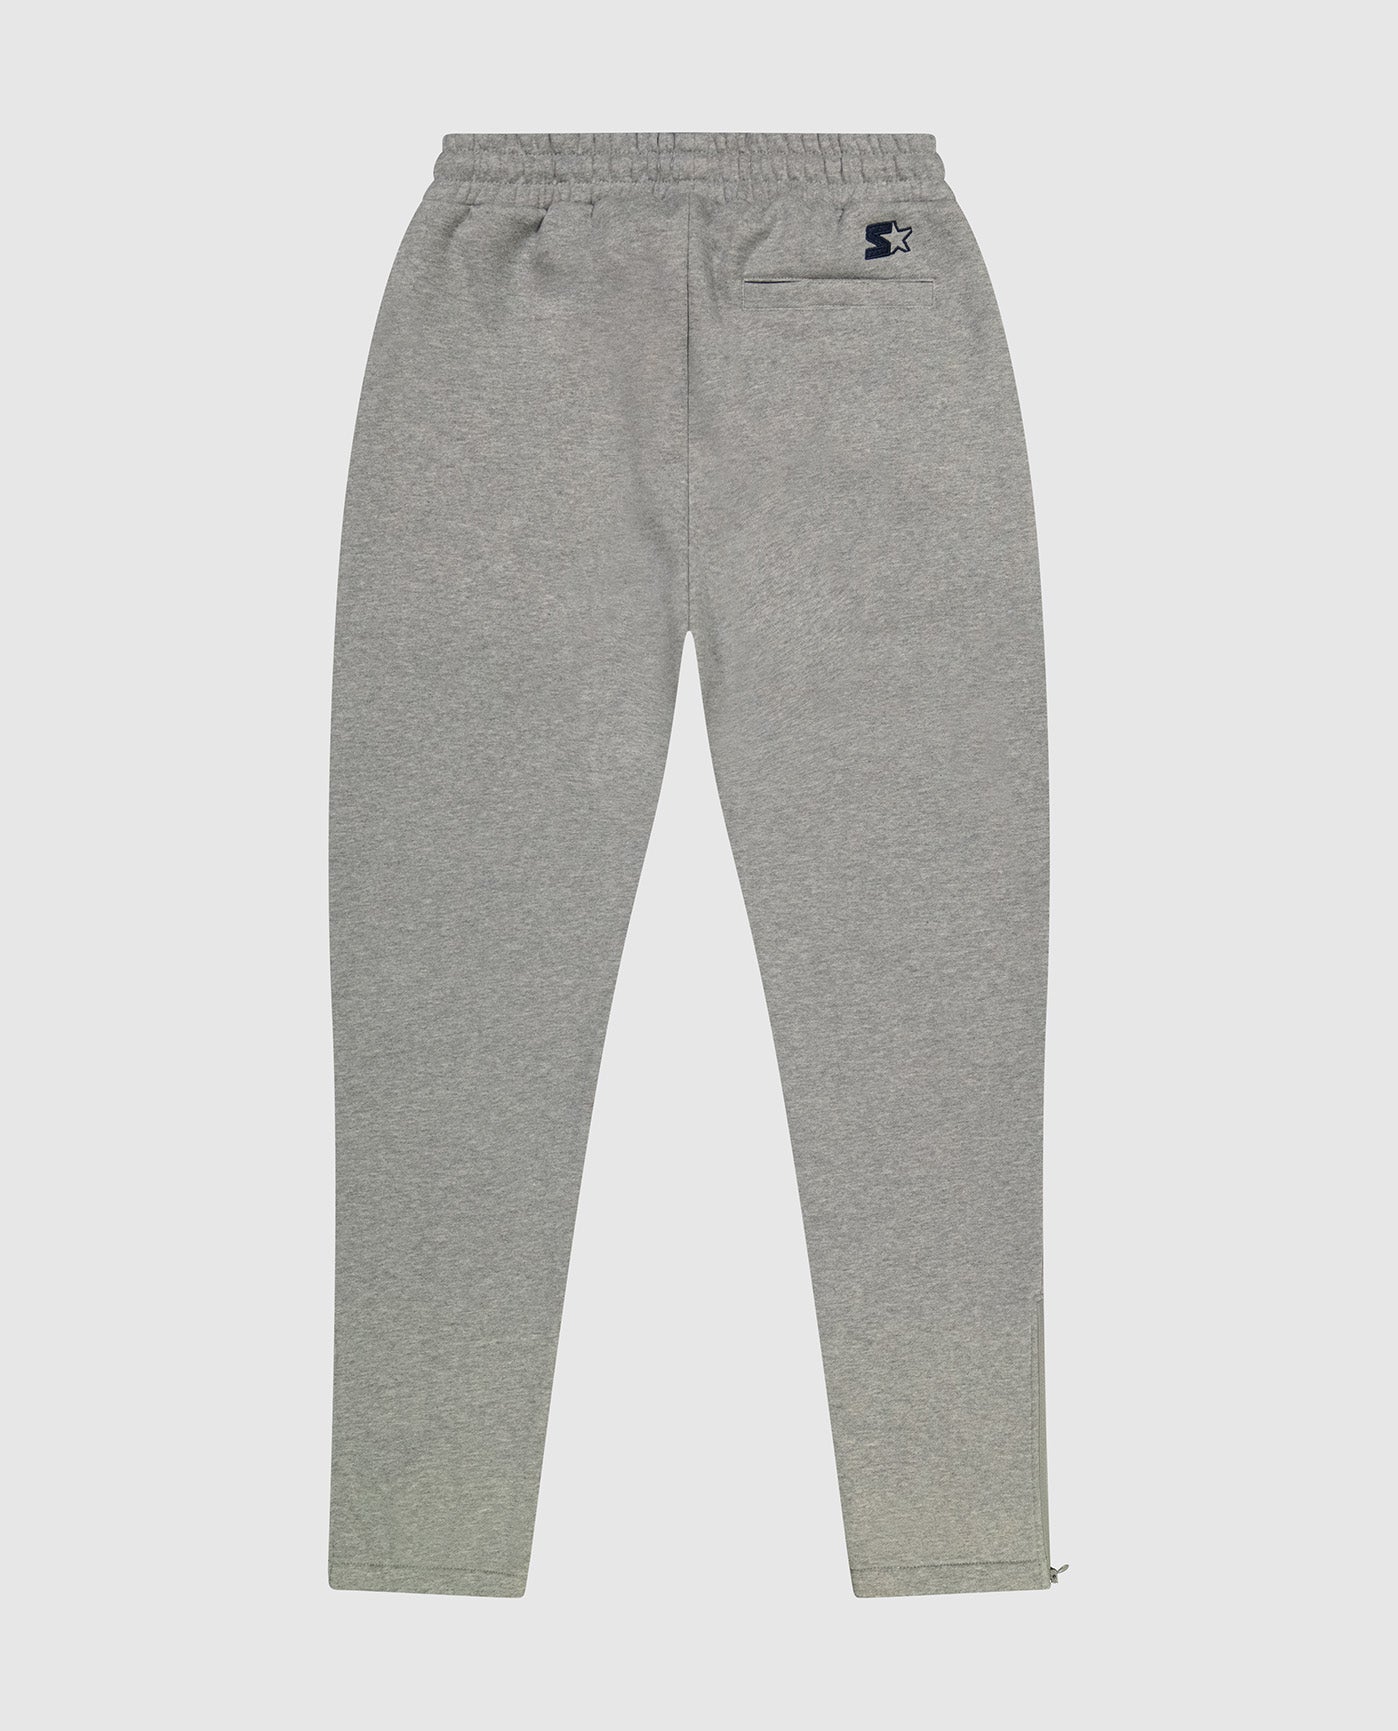 Back of Chicago Bears Sweatpants with starter logo | Bears Heather Grey